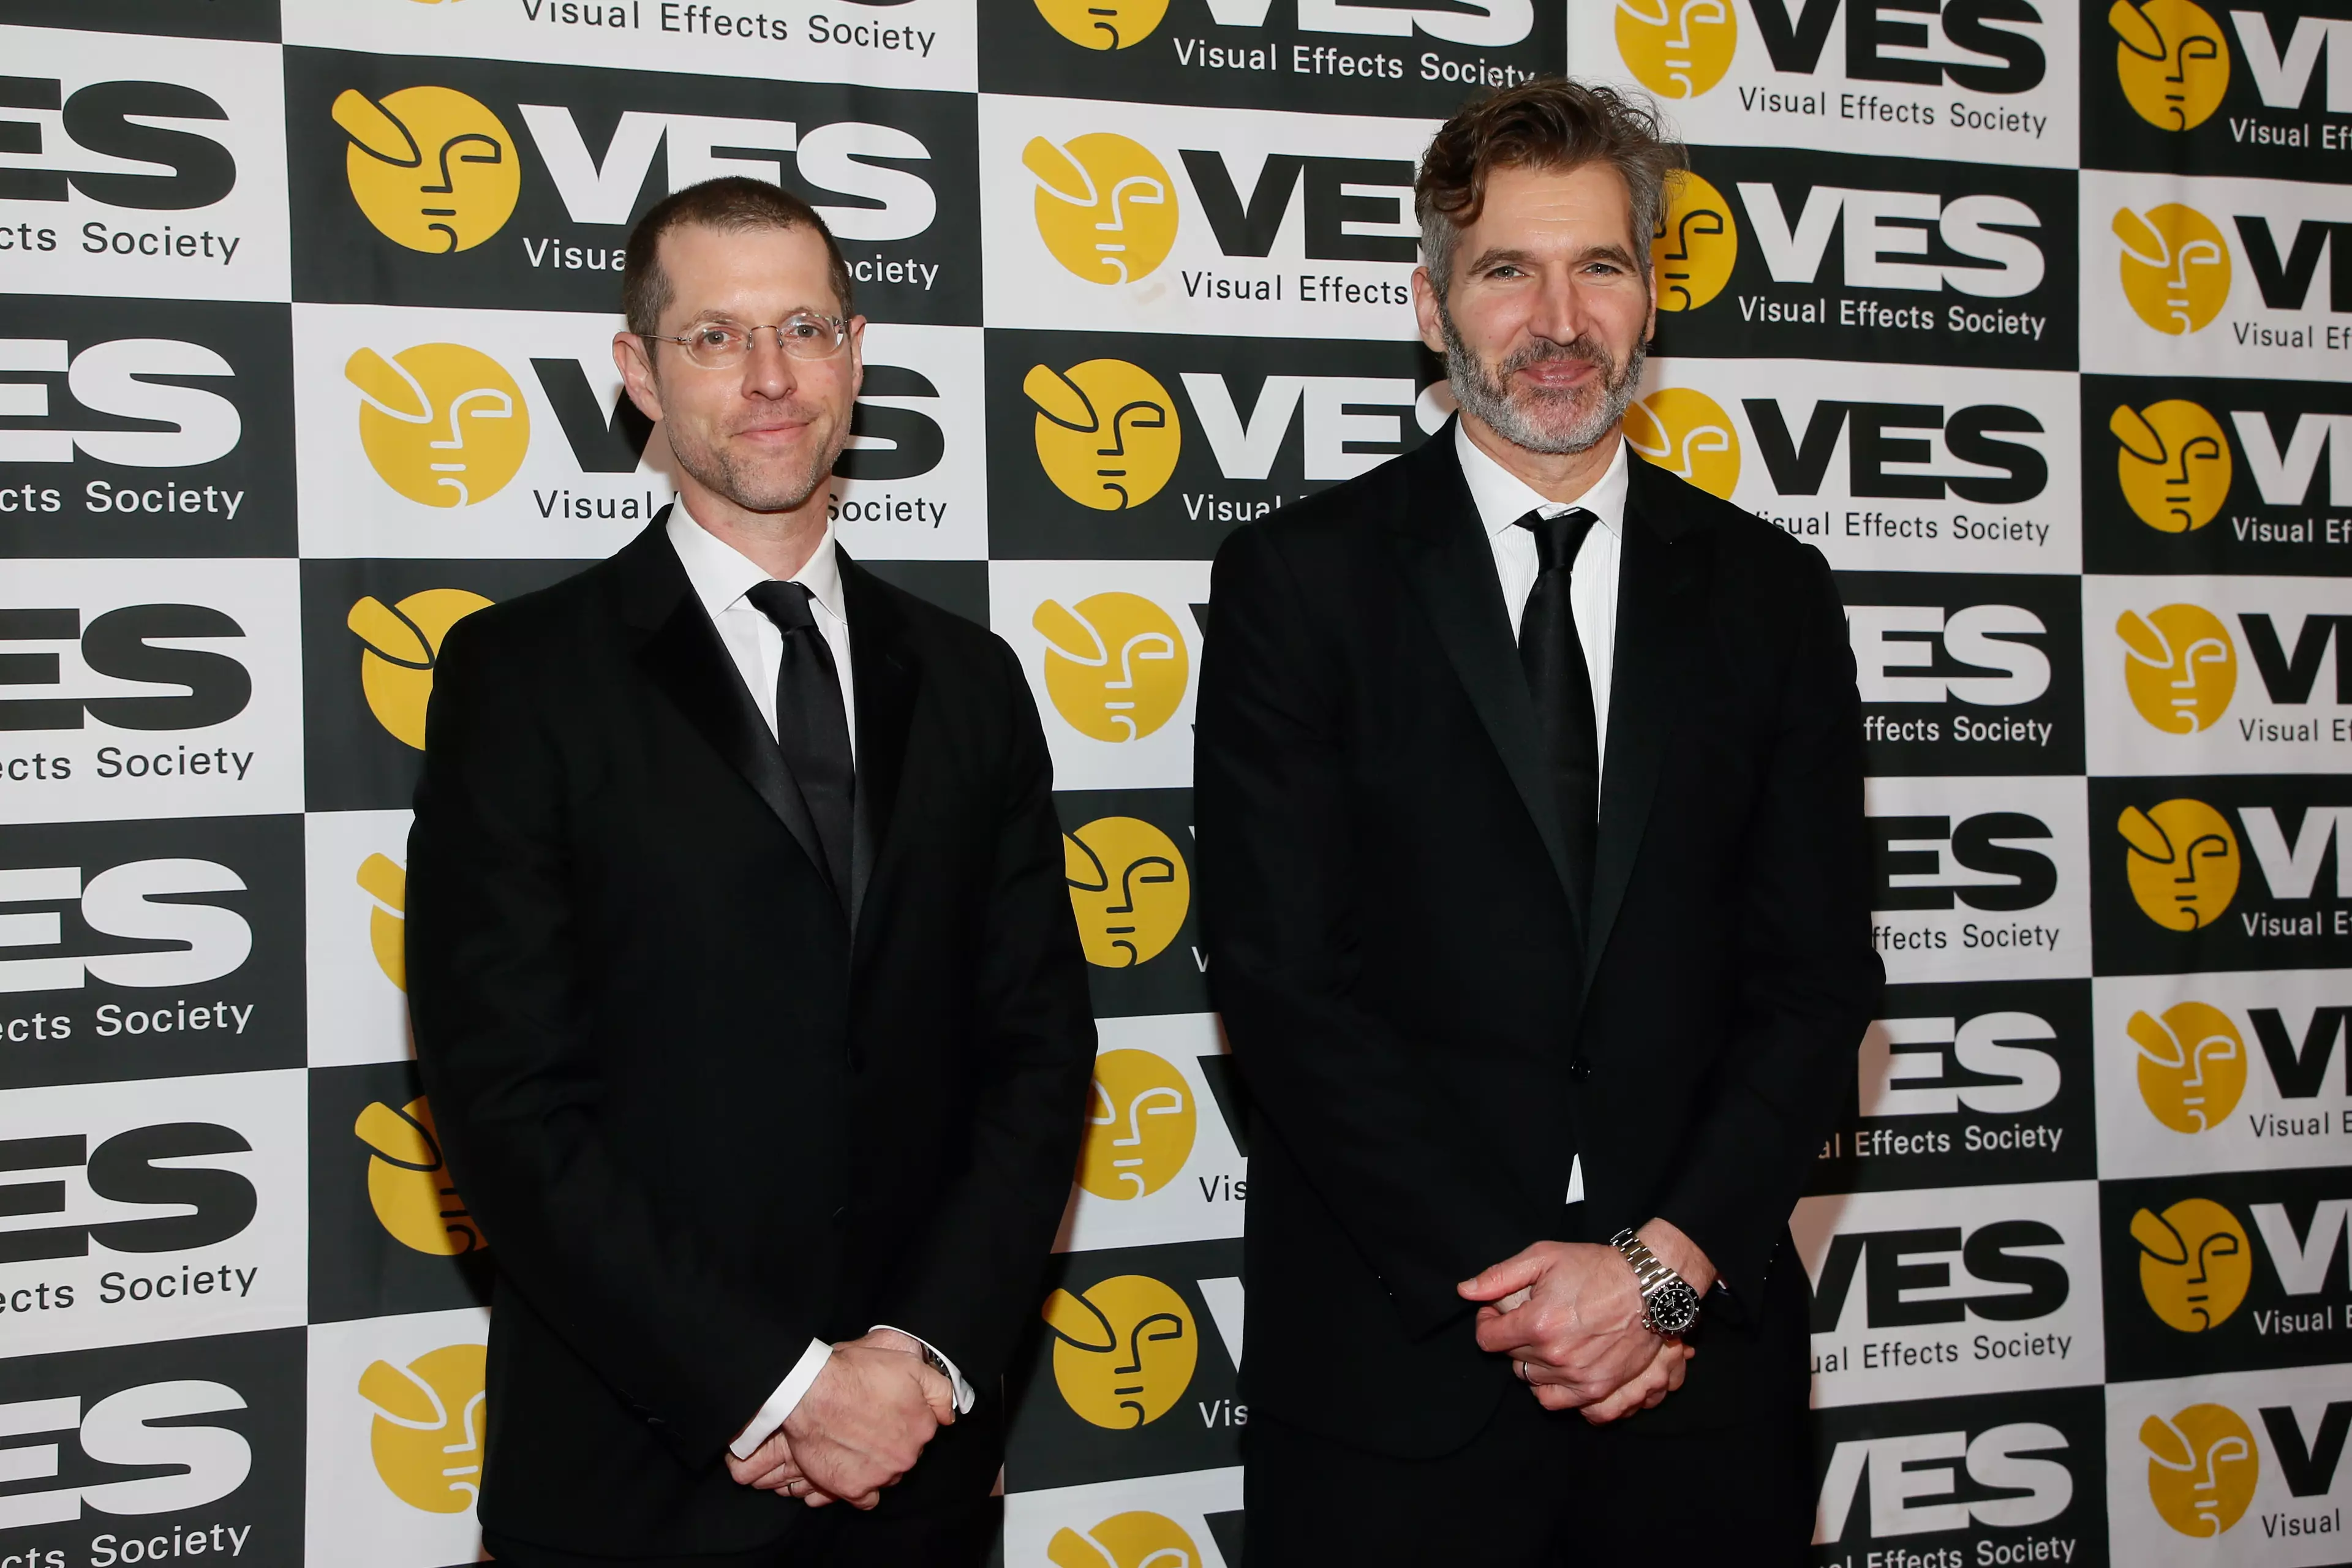 Game of Thrones creators David Benioff and D.B. Weiss will make the next Star Wars trilogy.